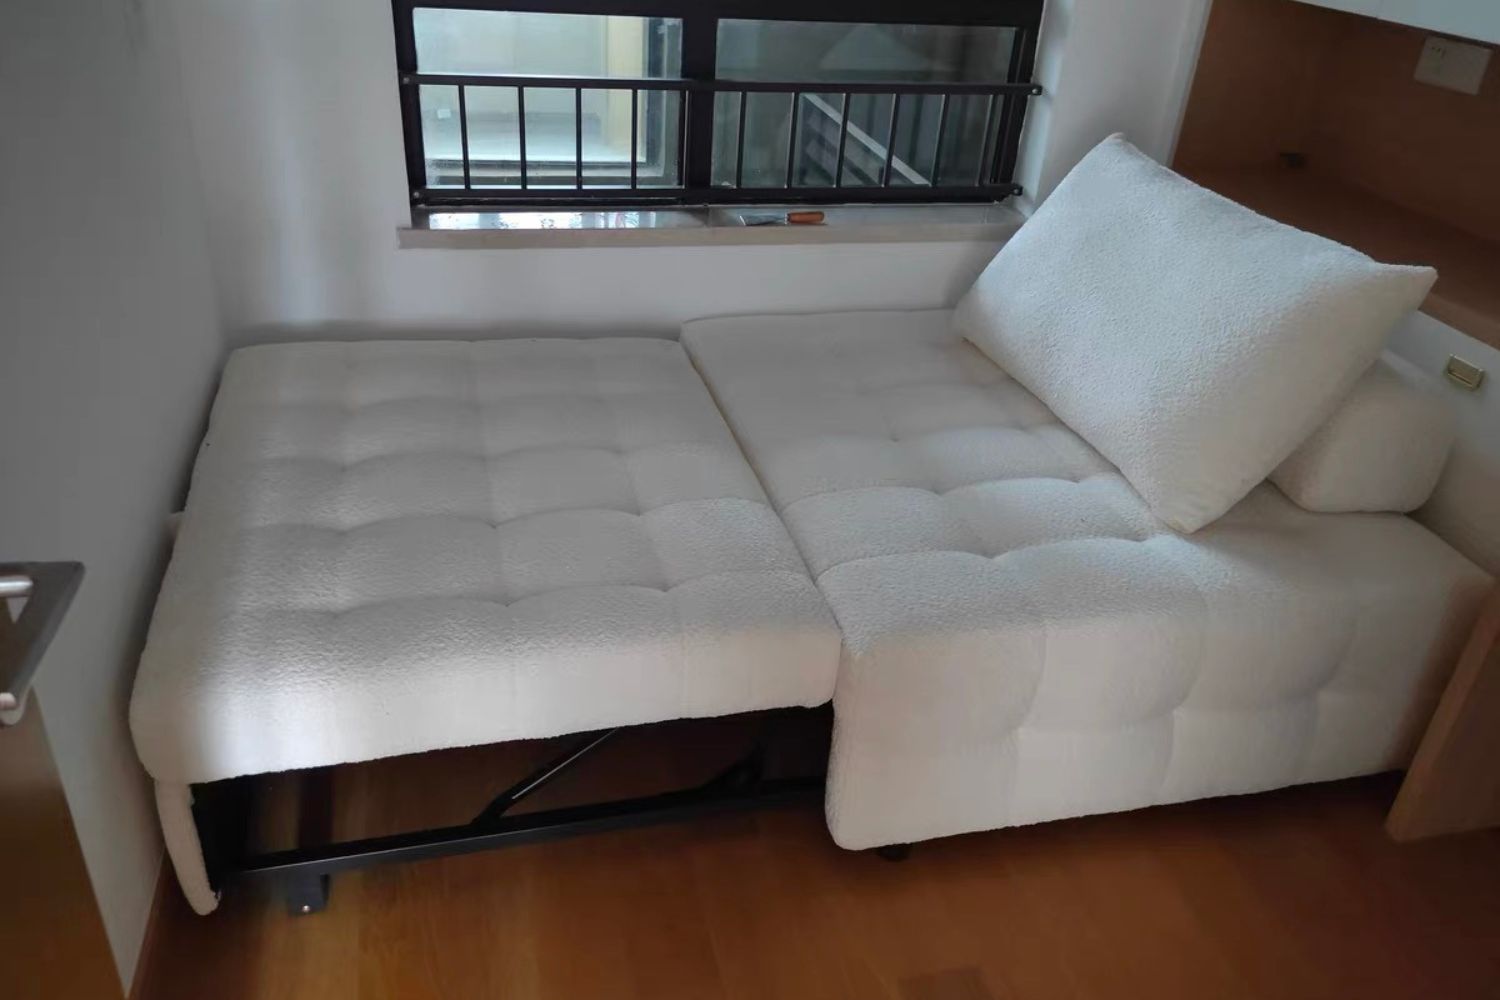 Candy 125cm white fabric sofa bed in real customer homes